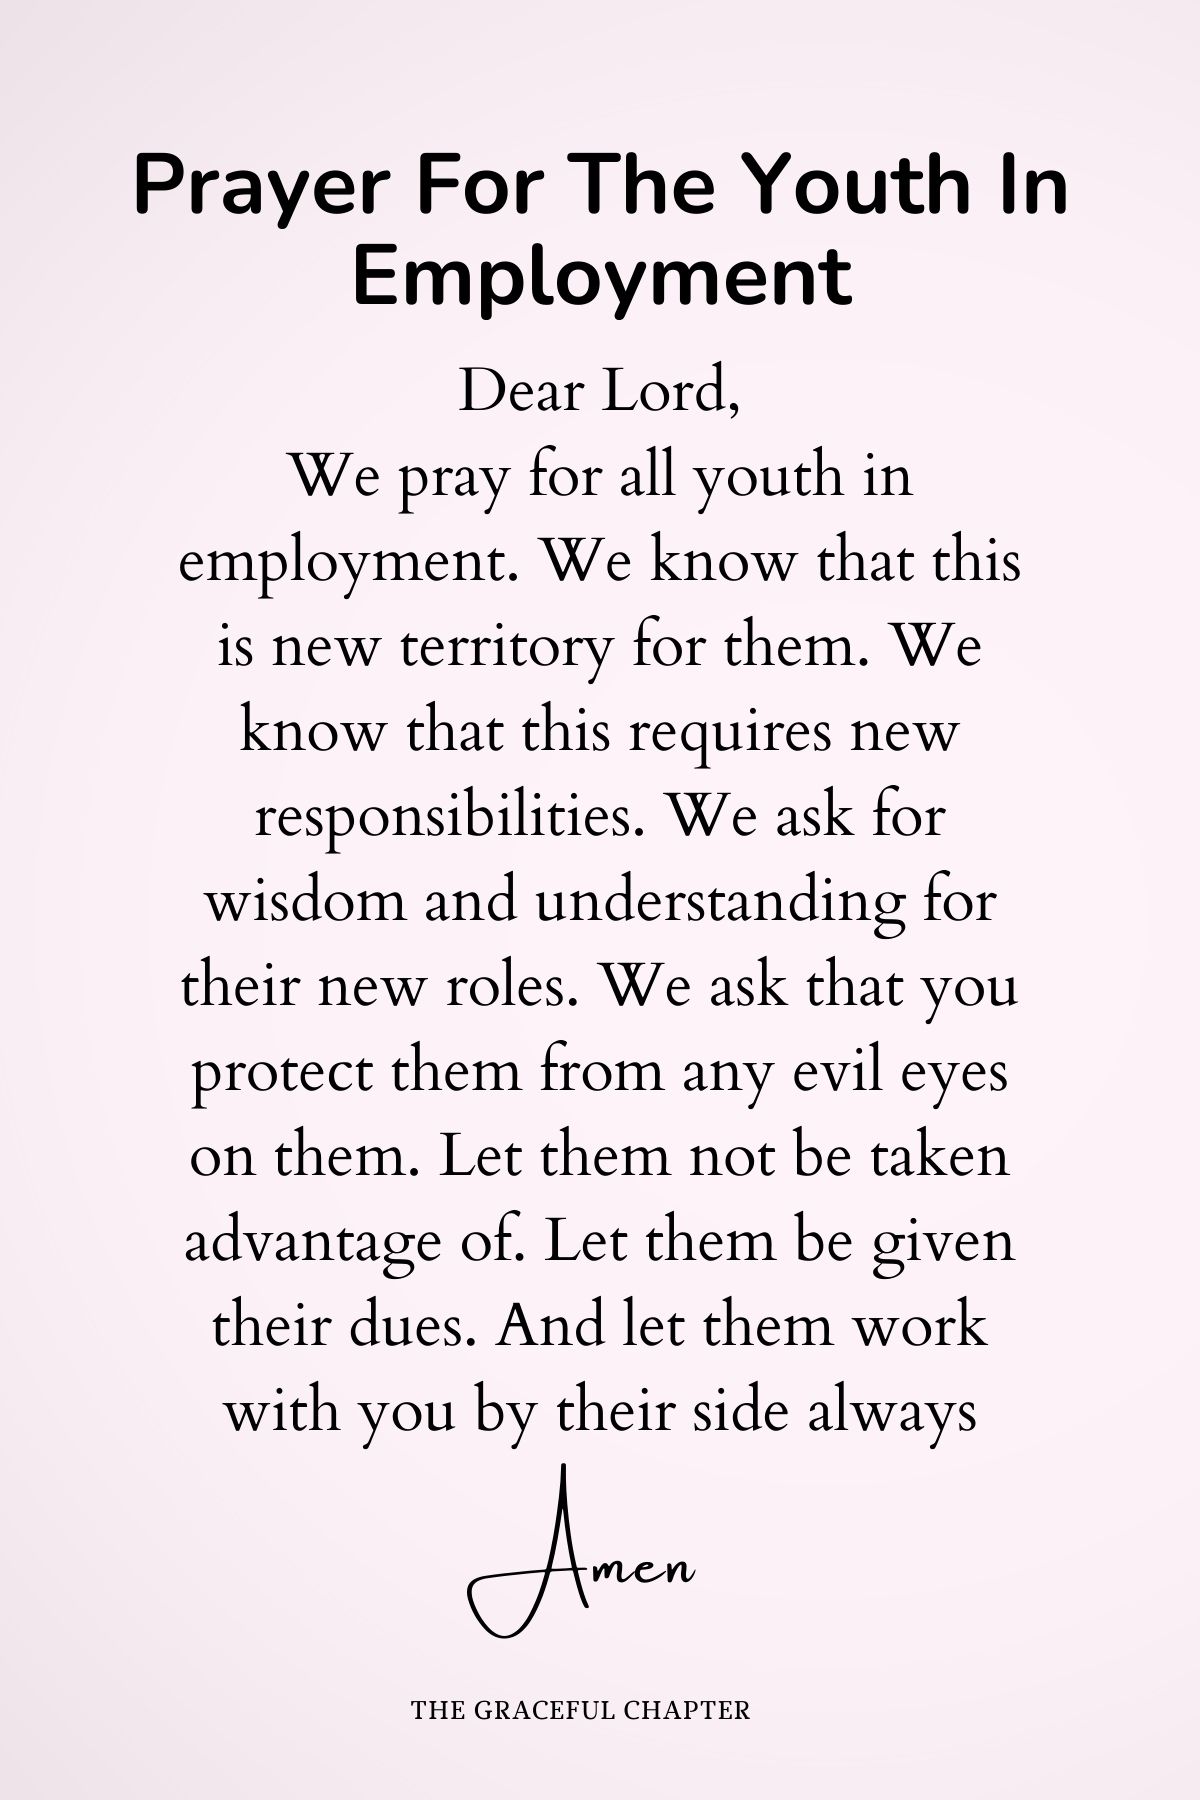 Prayer for the youth in employment